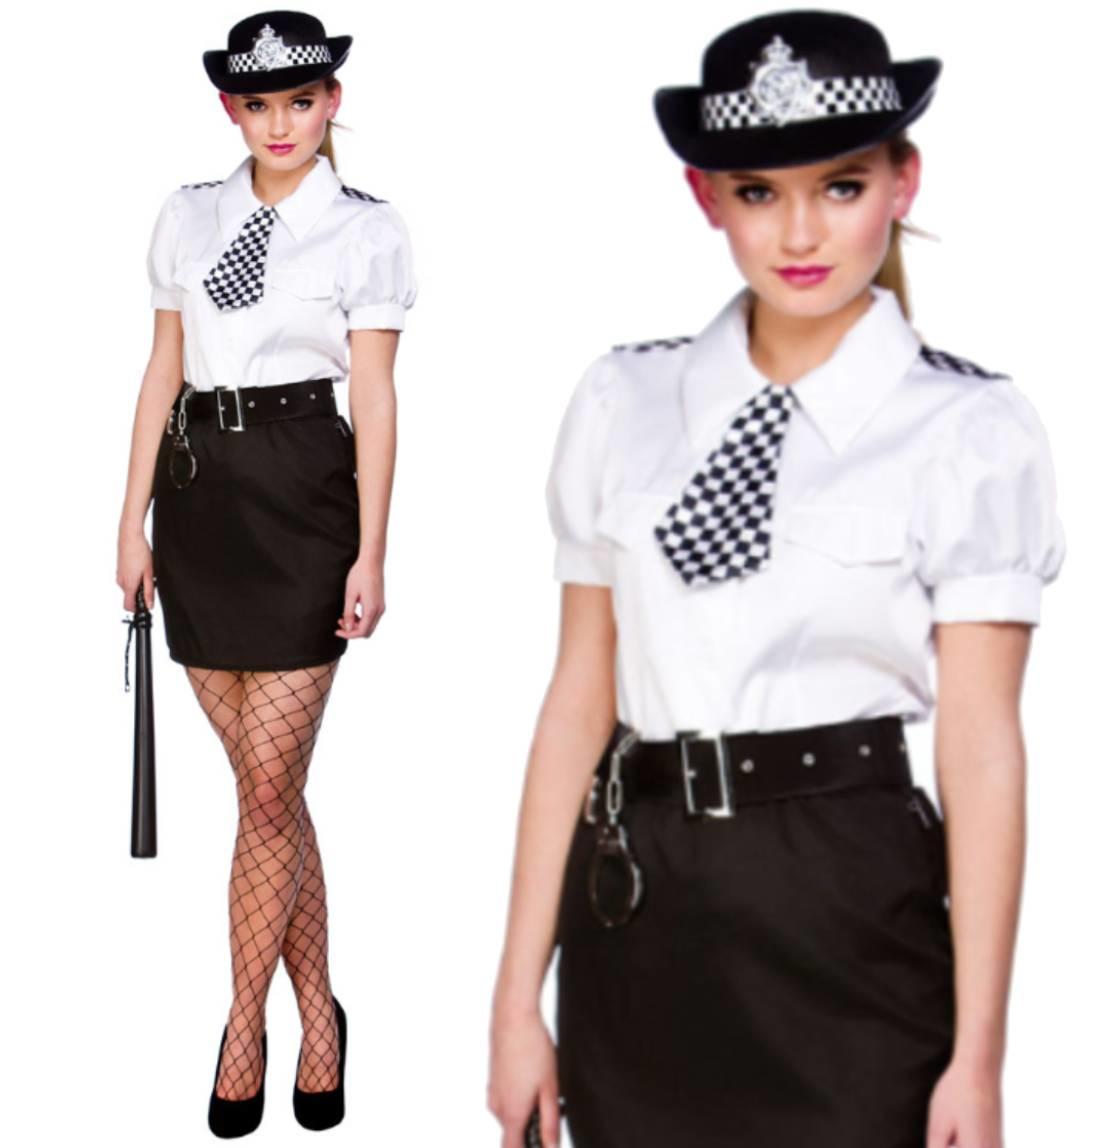 British Policewoman Constable Cutie Costume by Wicked SF-0144 available here at Karnival Costumes online party shop